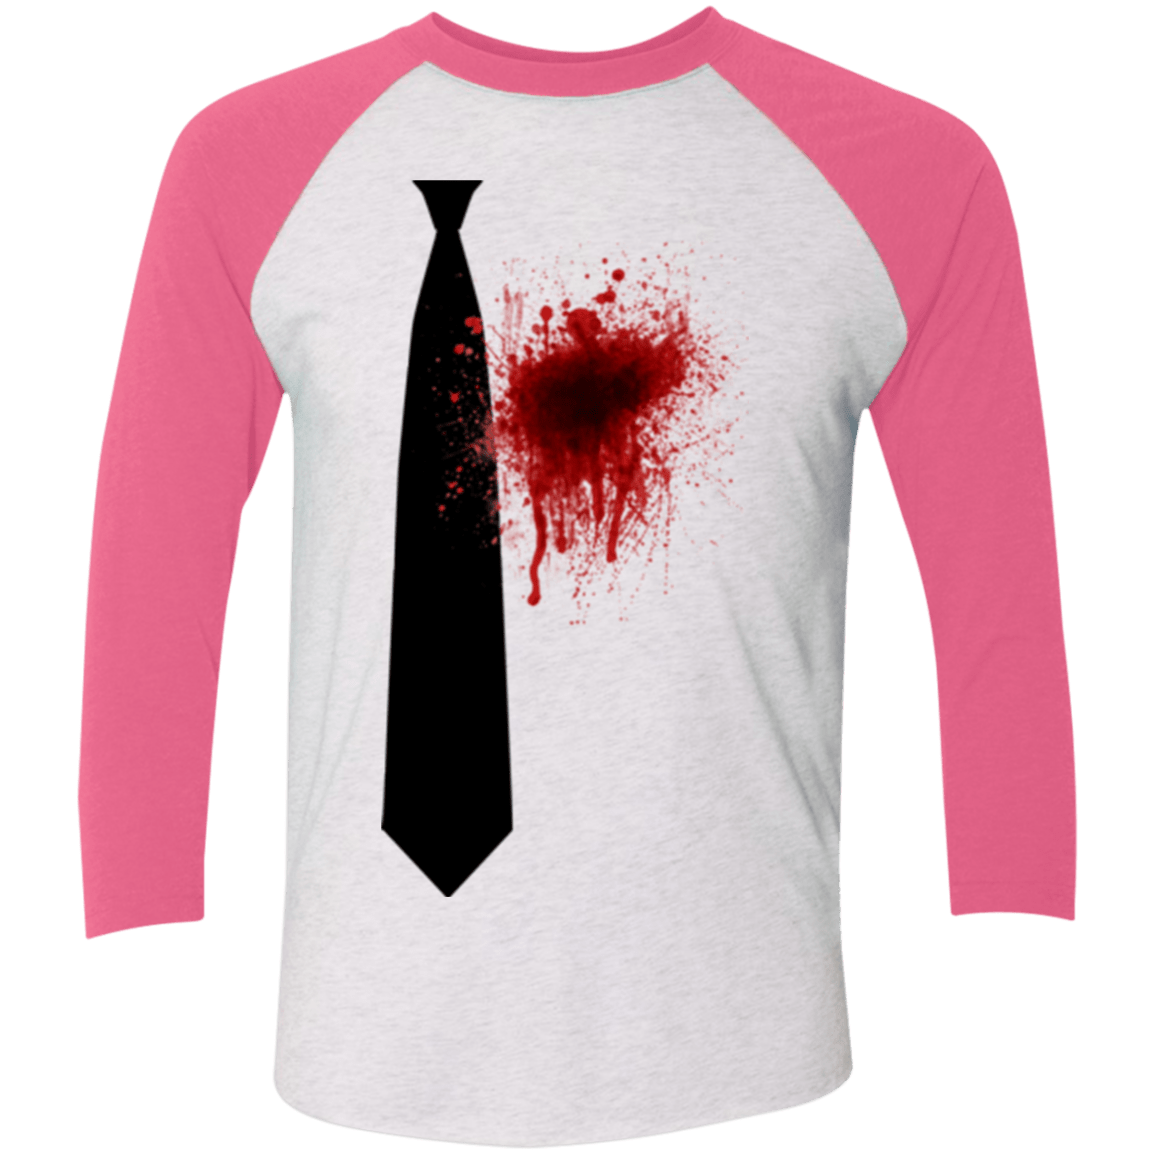 T-Shirts Heather White/Vintage Pink / X-Small Butcher tie Men's Triblend 3/4 Sleeve